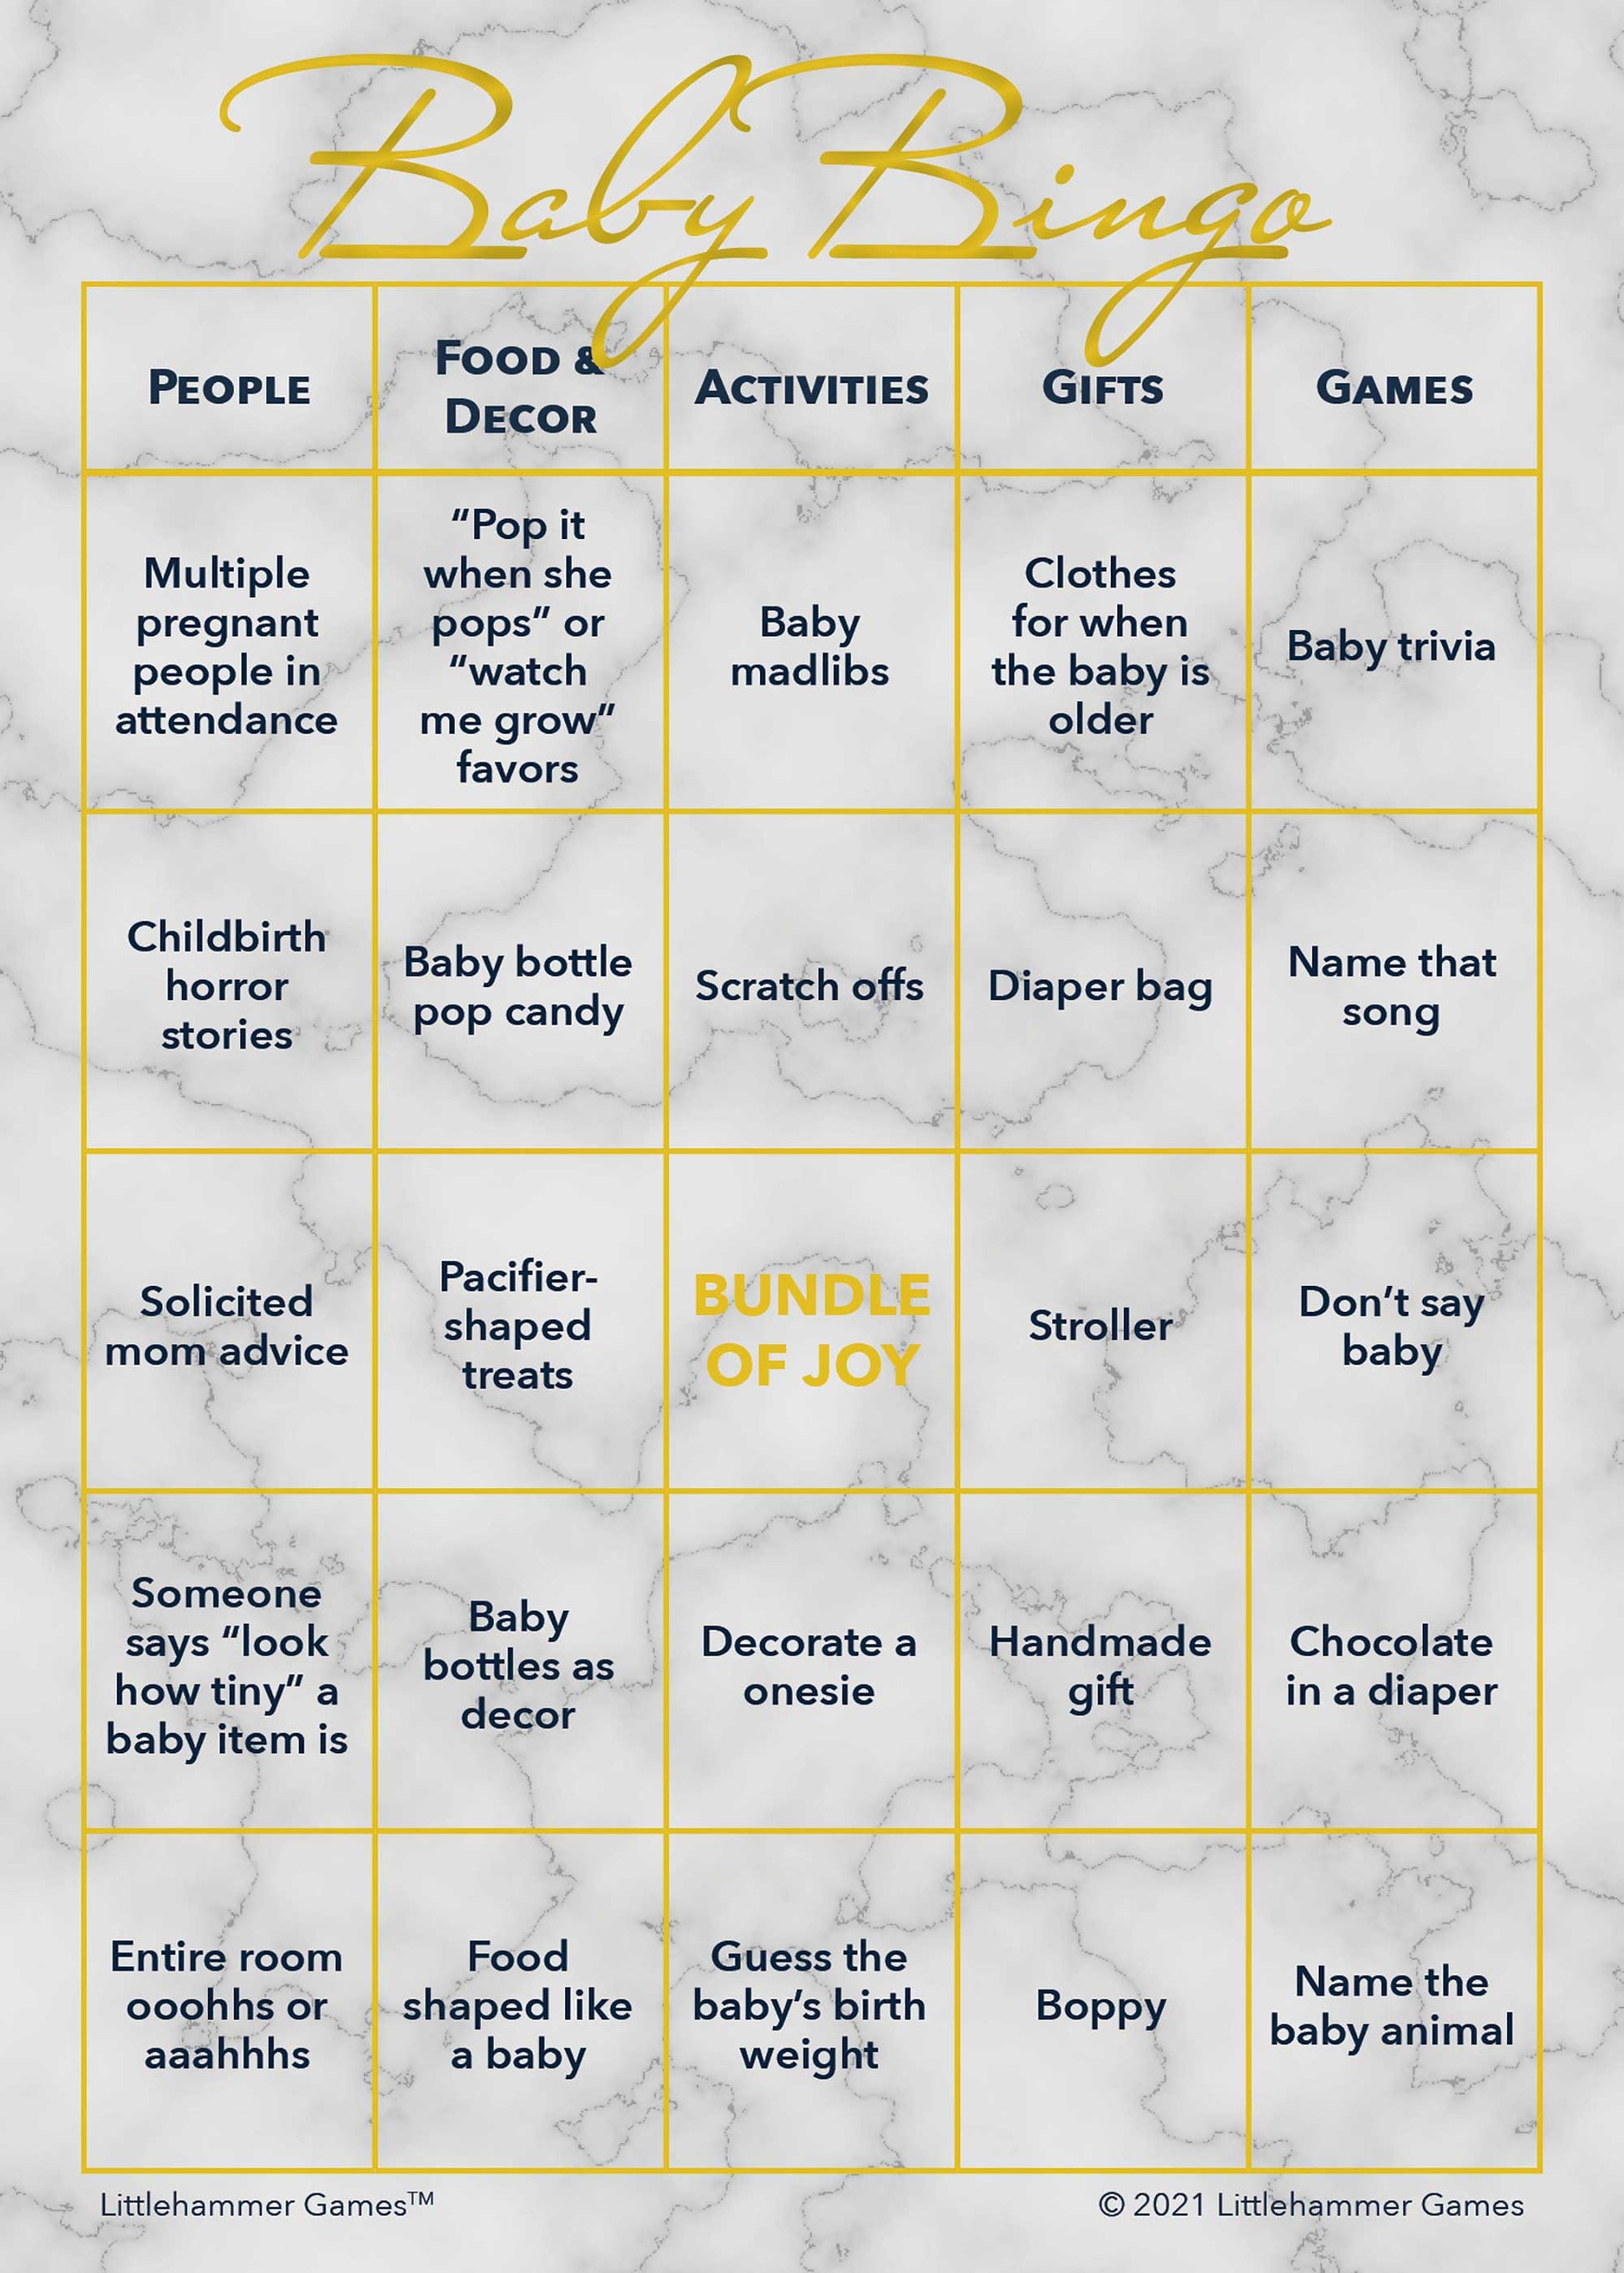 Baby Bingo game card with gold text on a marble background